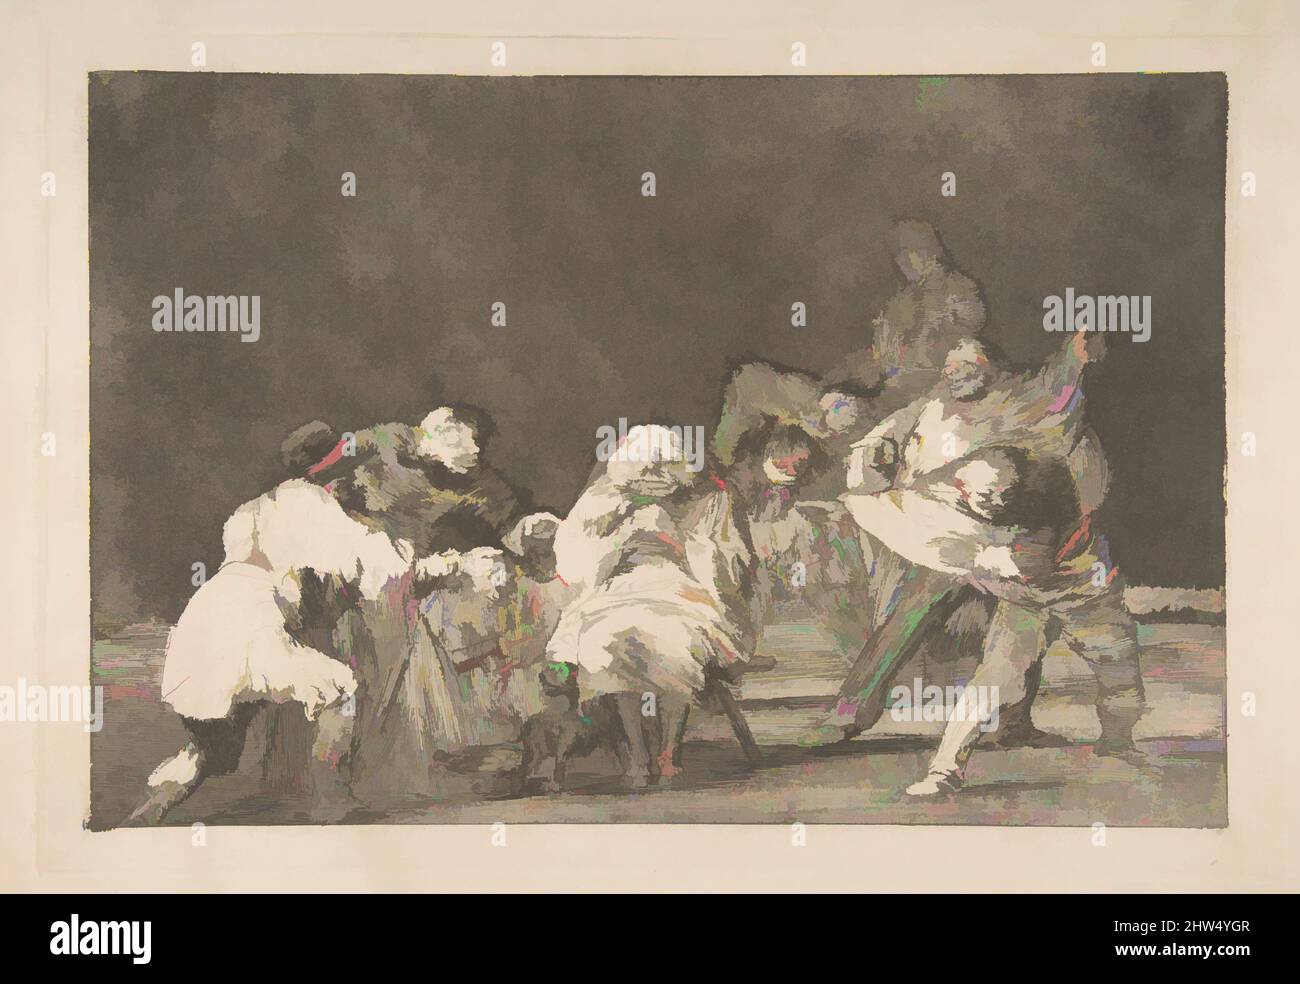 Art inspired by Plate 17 from the 'Disparates': Loyalty, ca. 1816–23 (private printing ca4), Etching and burnished aquatint, Plate: 9 9/16 × 13 7/8 in. (24.3 × 35.2 cm), Prints, Goya (Francisco de Goya y Lucientes) (Spanish, Fuendetodos 1746–1828 Bordeaux), From the private printing c, Classic works modernized by Artotop with a splash of modernity. Shapes, color and value, eye-catching visual impact on art. Emotions through freedom of artworks in a contemporary way. A timeless message pursuing a wildly creative new direction. Artists turning to the digital medium and creating the Artotop NFT Stock Photo